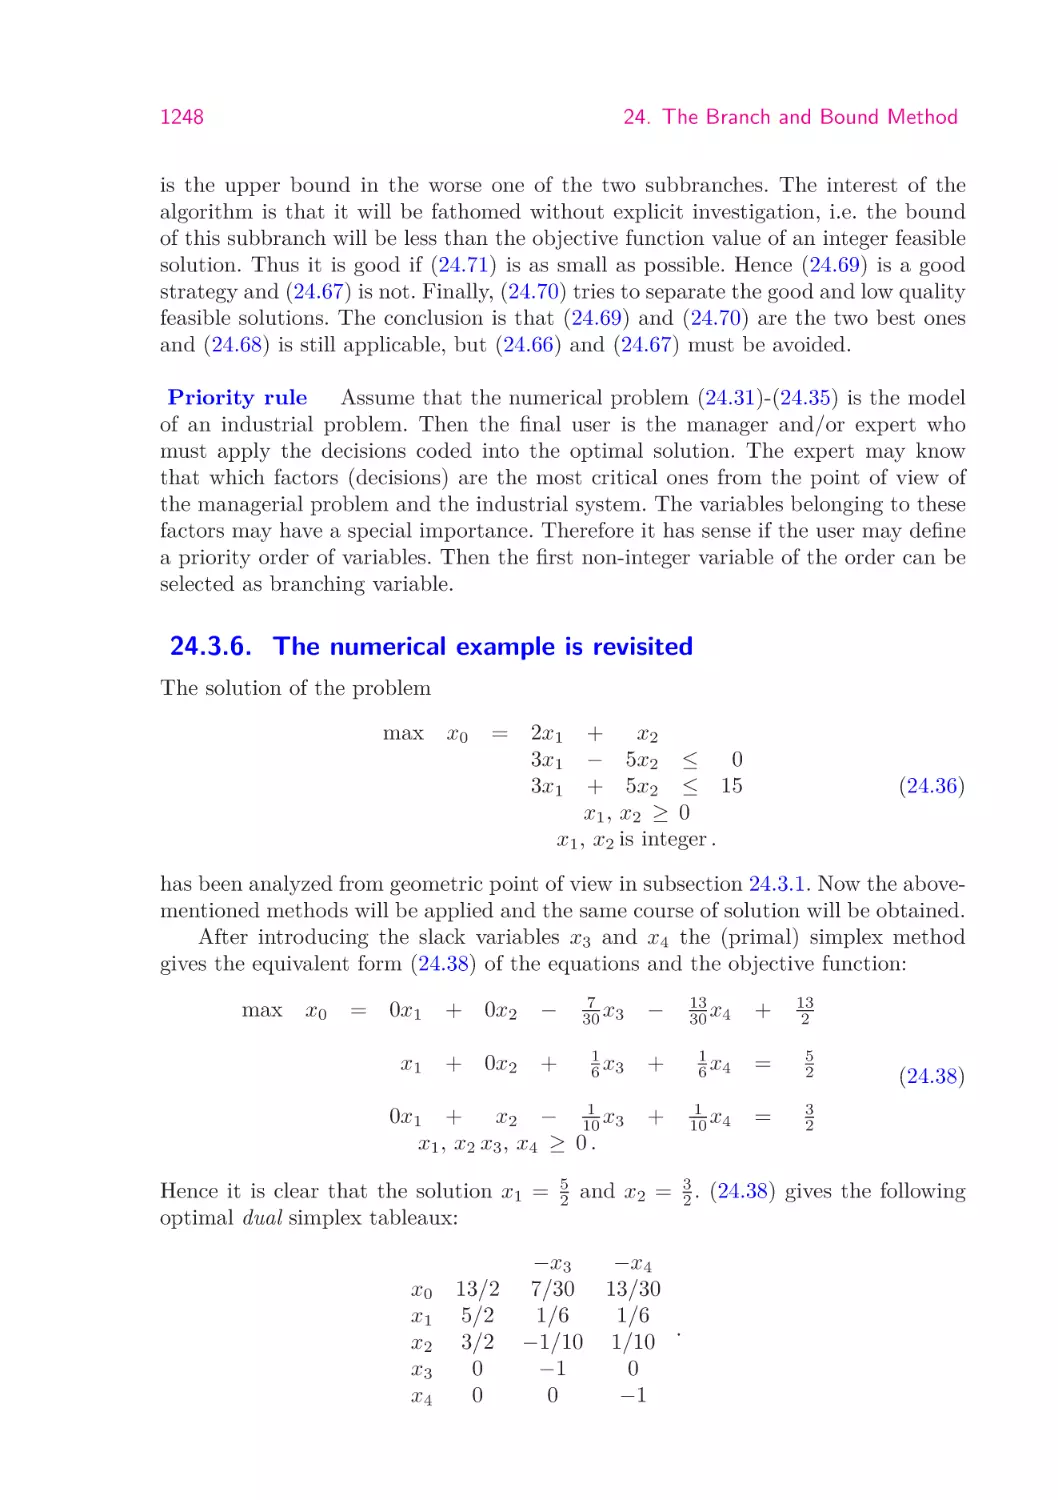 24.3.6.  The numerical example is revisited